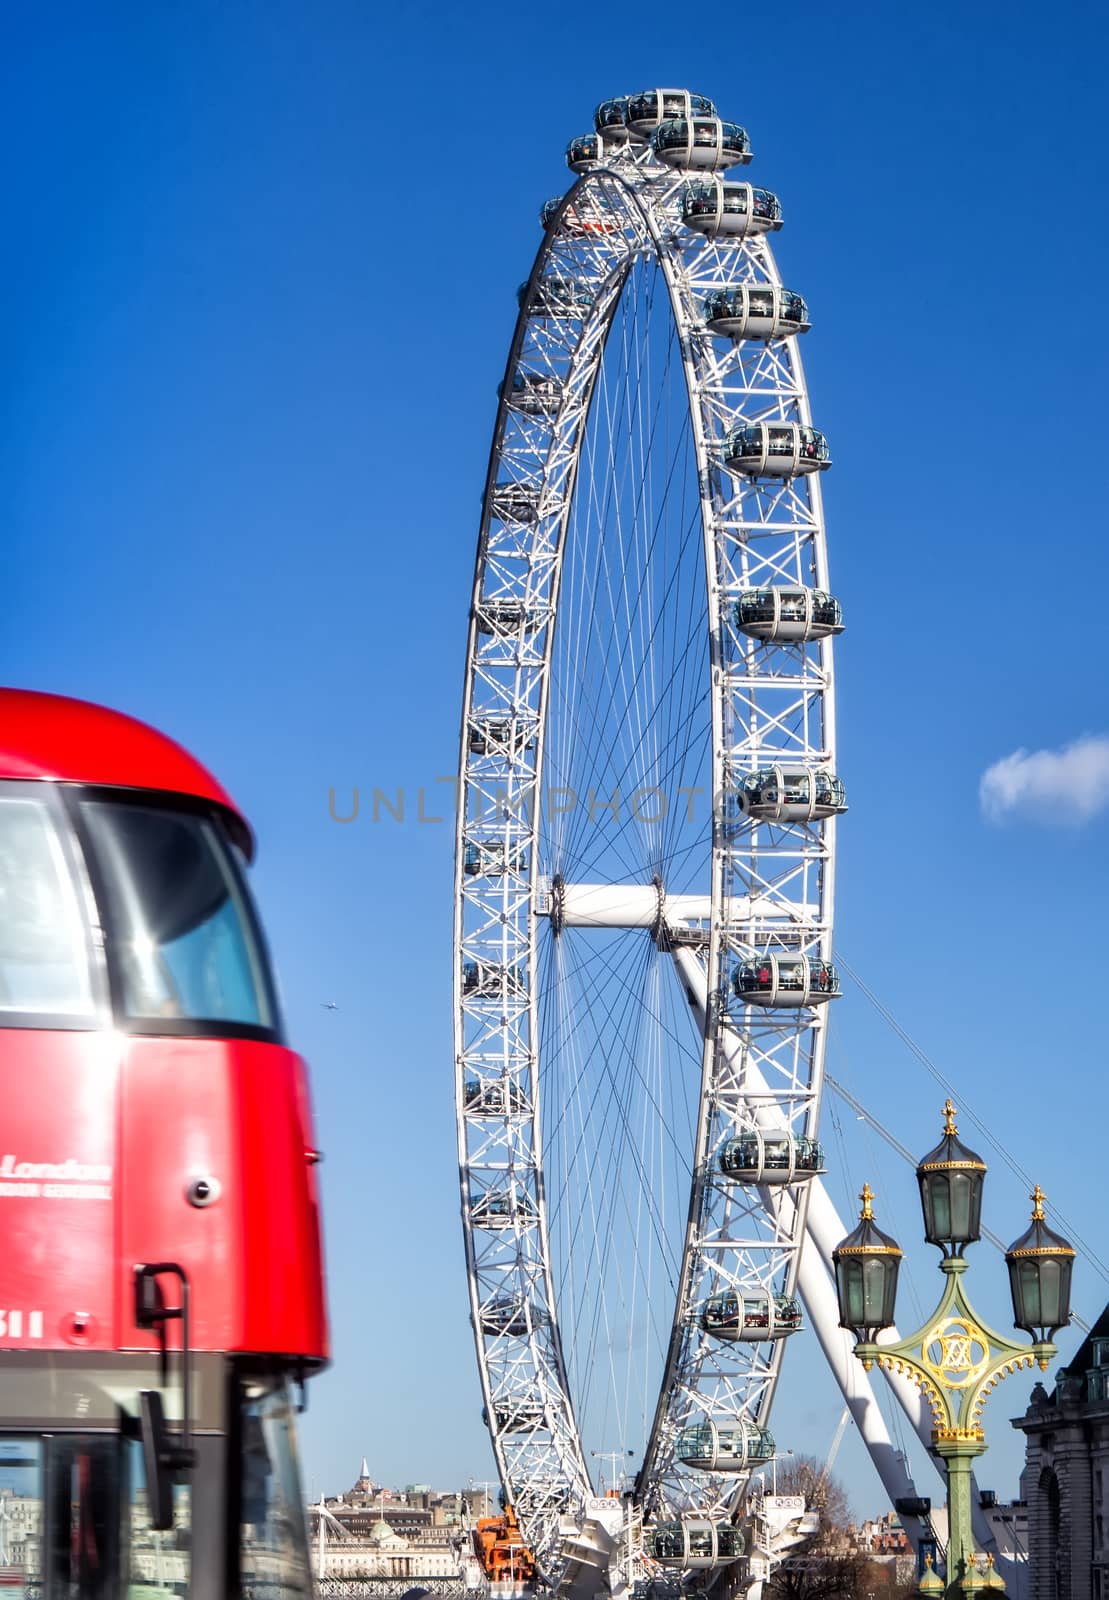 London Eye (135 m tall, diameter of 120 m), a famous tourist attraction over river Thames.